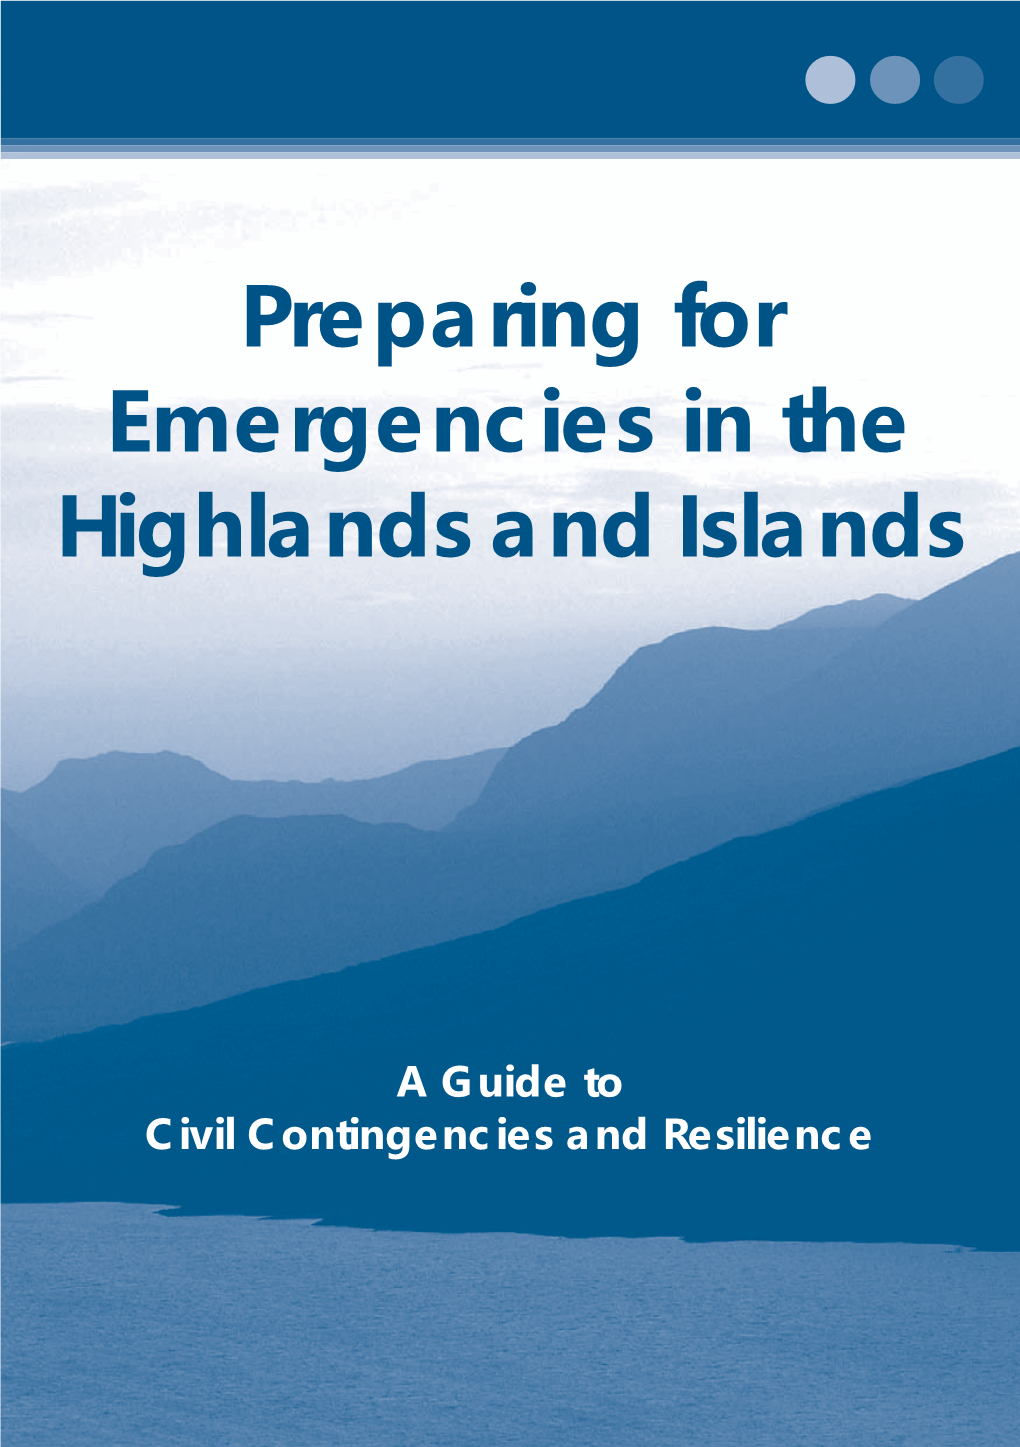 Preparing for Emergencies in the Highlands and Islands